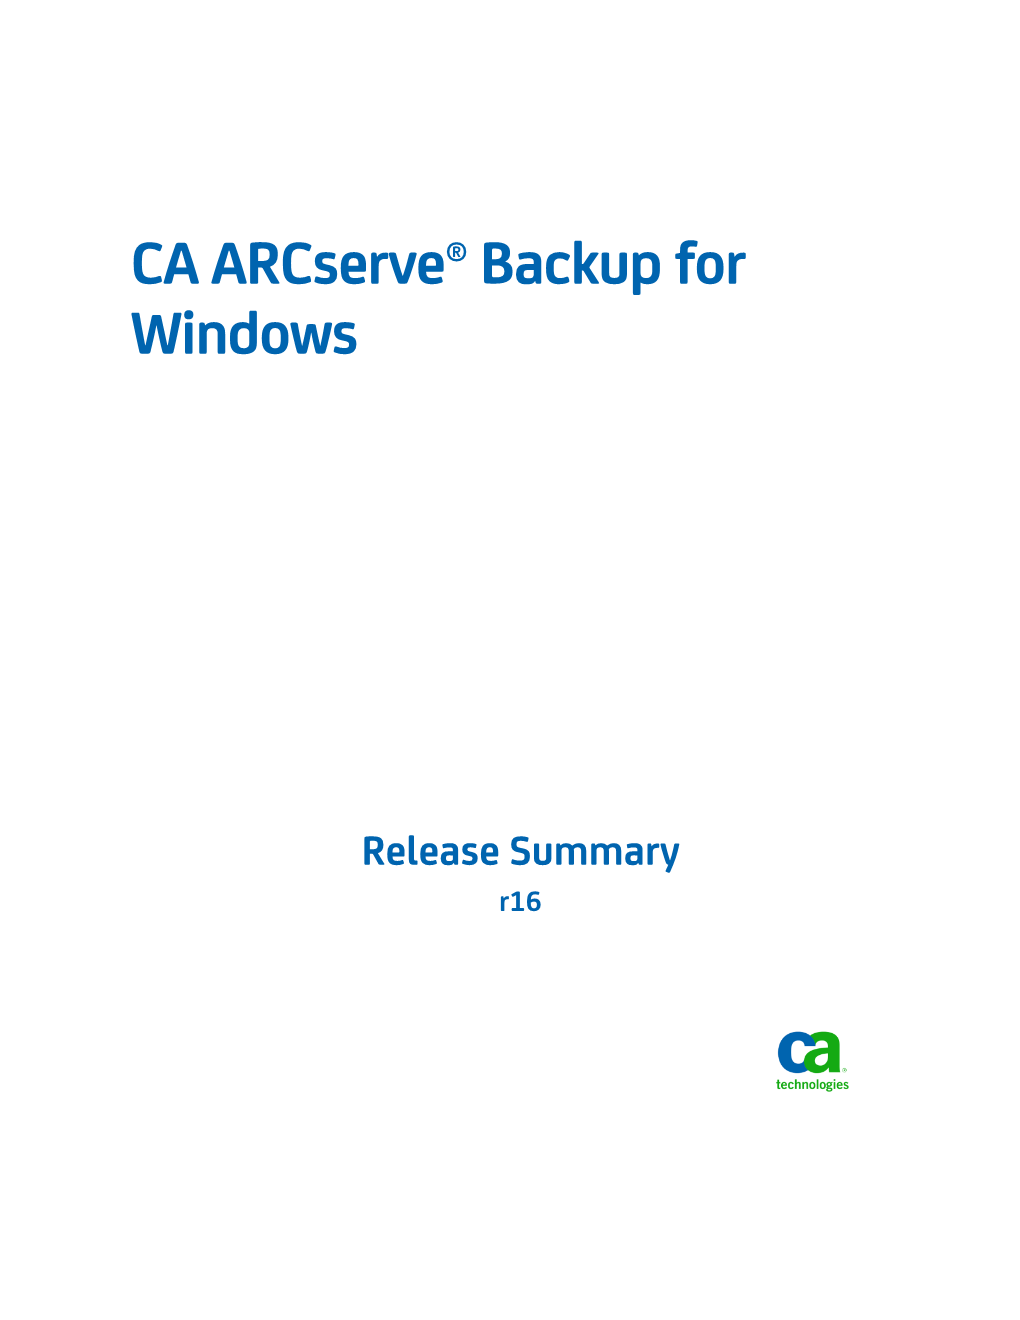 CA Arcserve Backup for Windows Release Summary